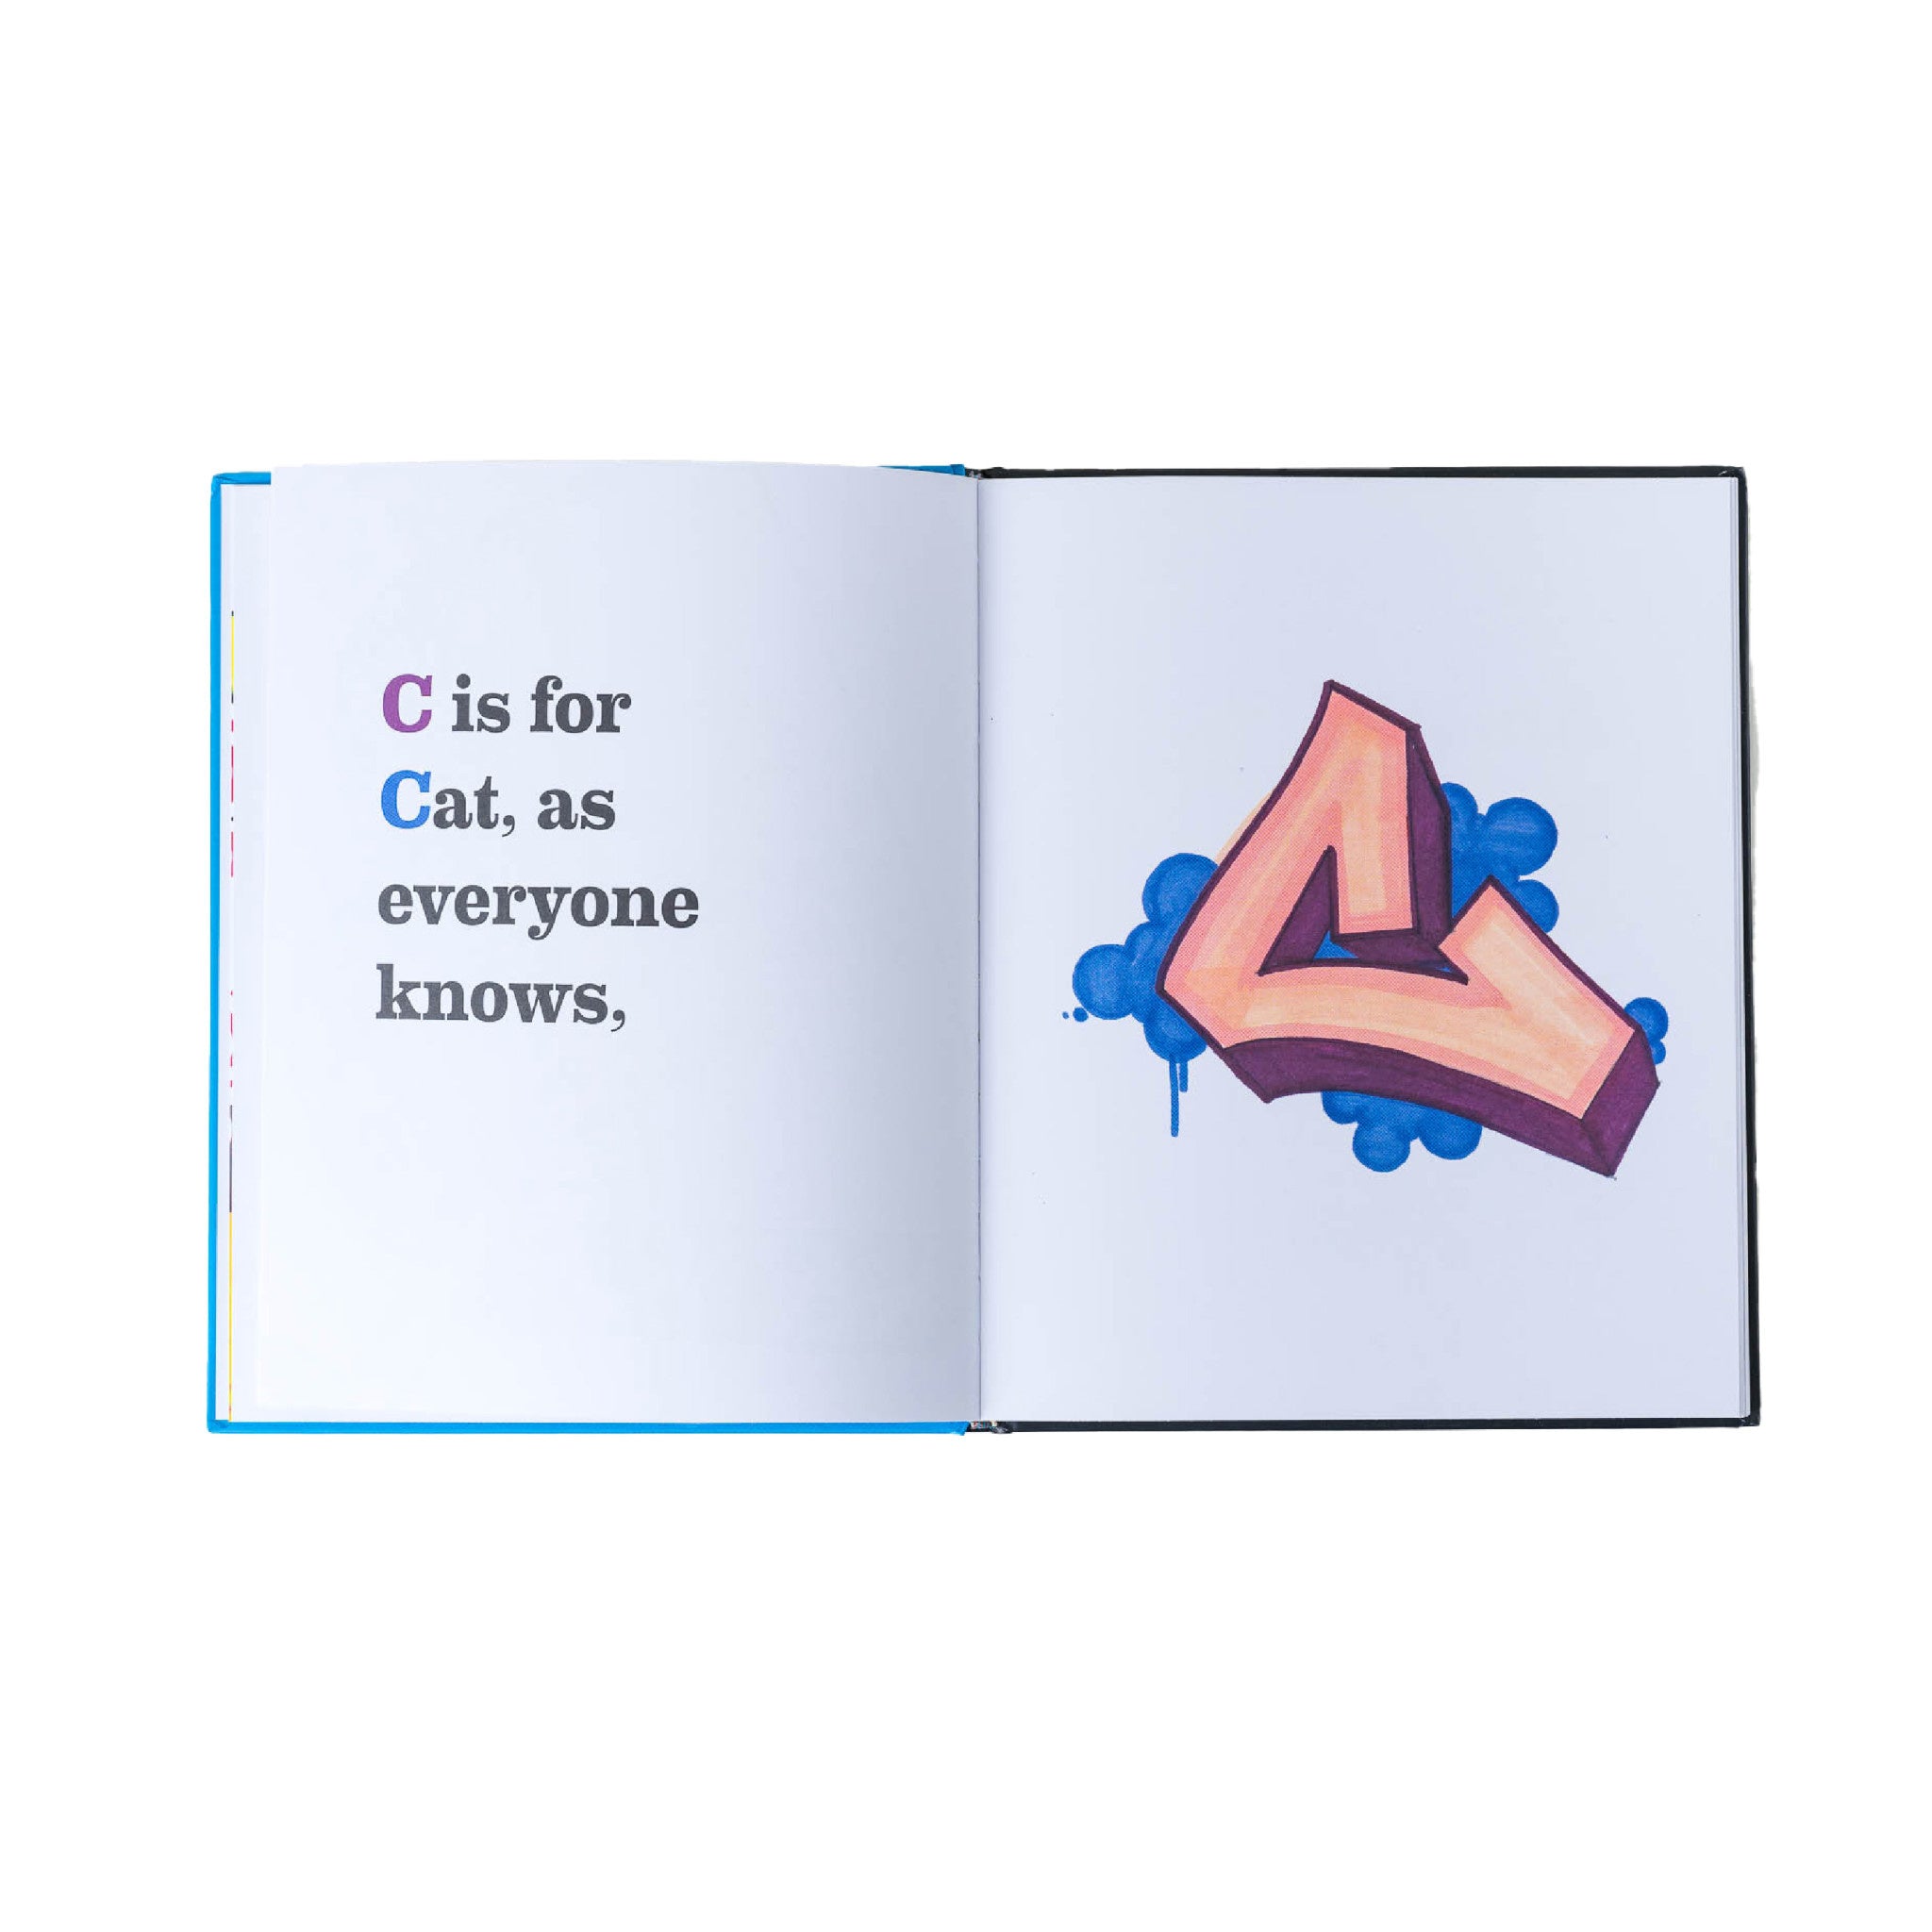 The ABC's of Graffiti Coloring Book: Learn the Alphabet For Kids